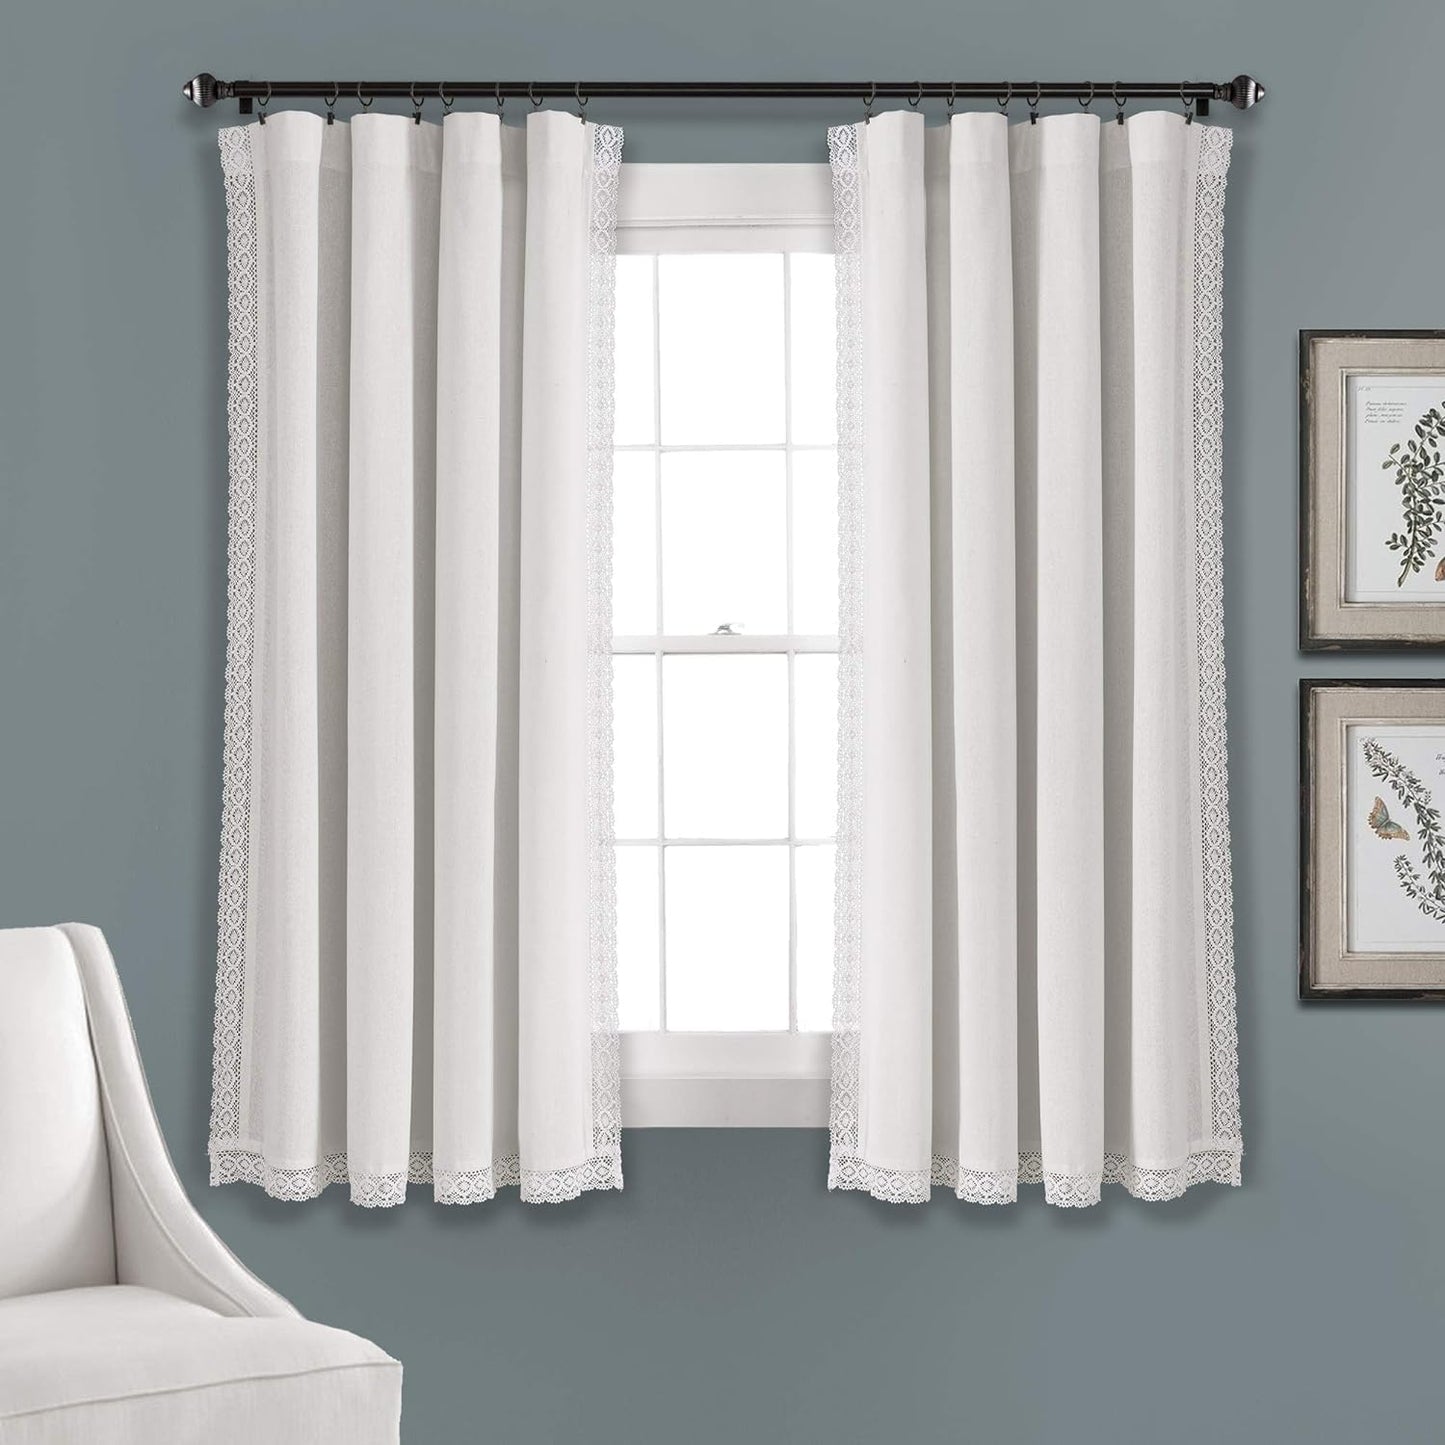 Lush Decor Rosalie Light Filtering Window Curtain Panel Set- Pair- Vintage Farmhouse & French Country Style Curtains - Timeless Dreamy Drape - Romantic Lace Trim - 54" W X 84" L, White  Triangle Home Fashions White Window Panel 54"W X 63"L